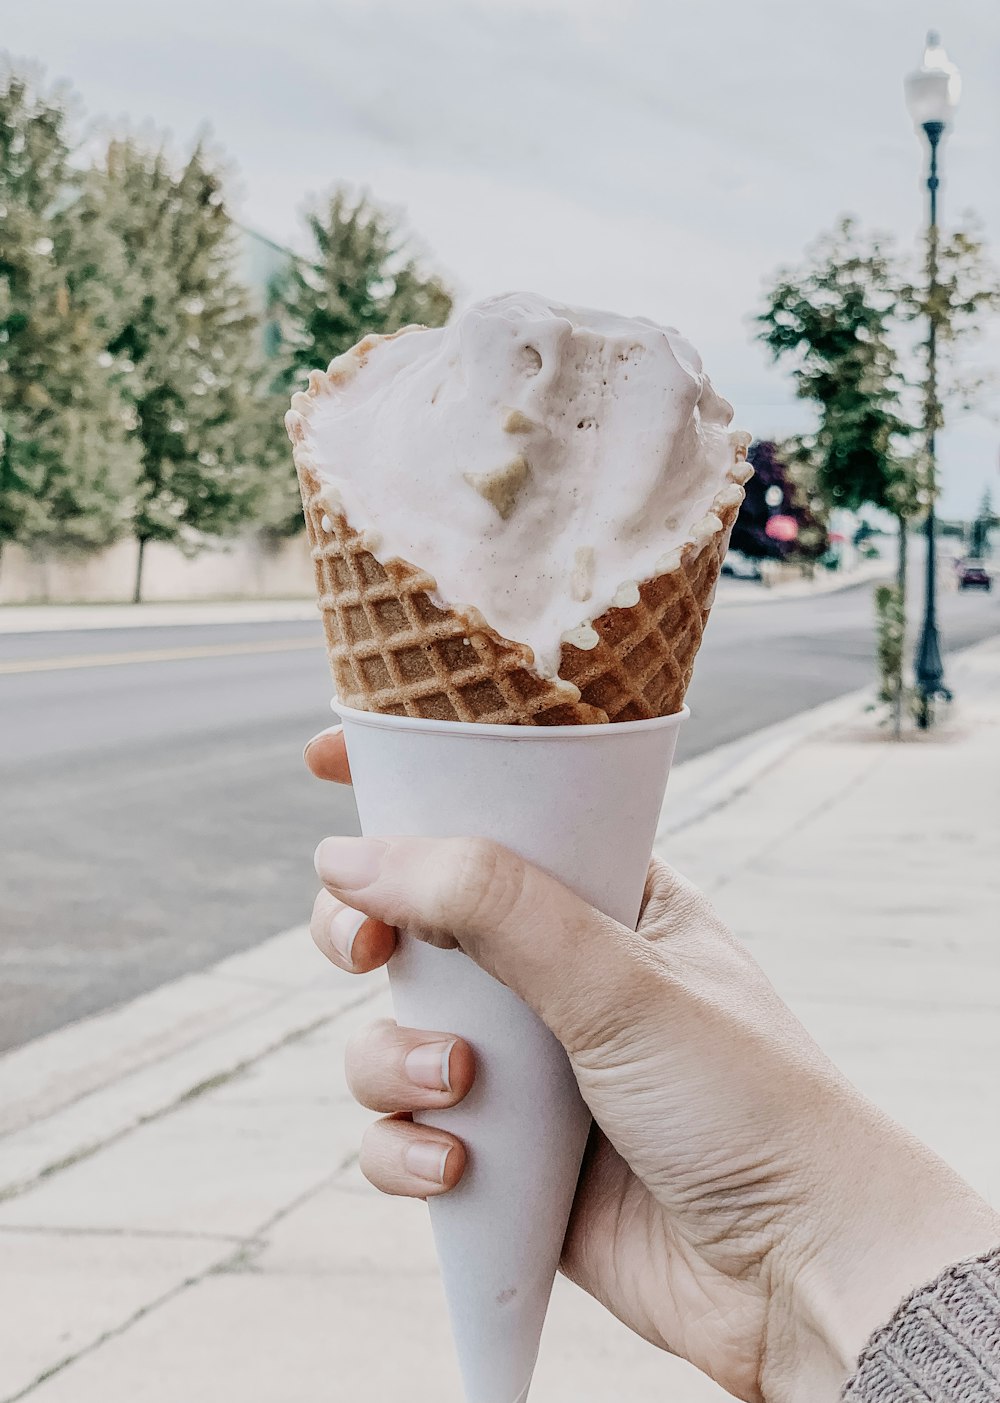 a person holding an ice cream cone on a sidewalk